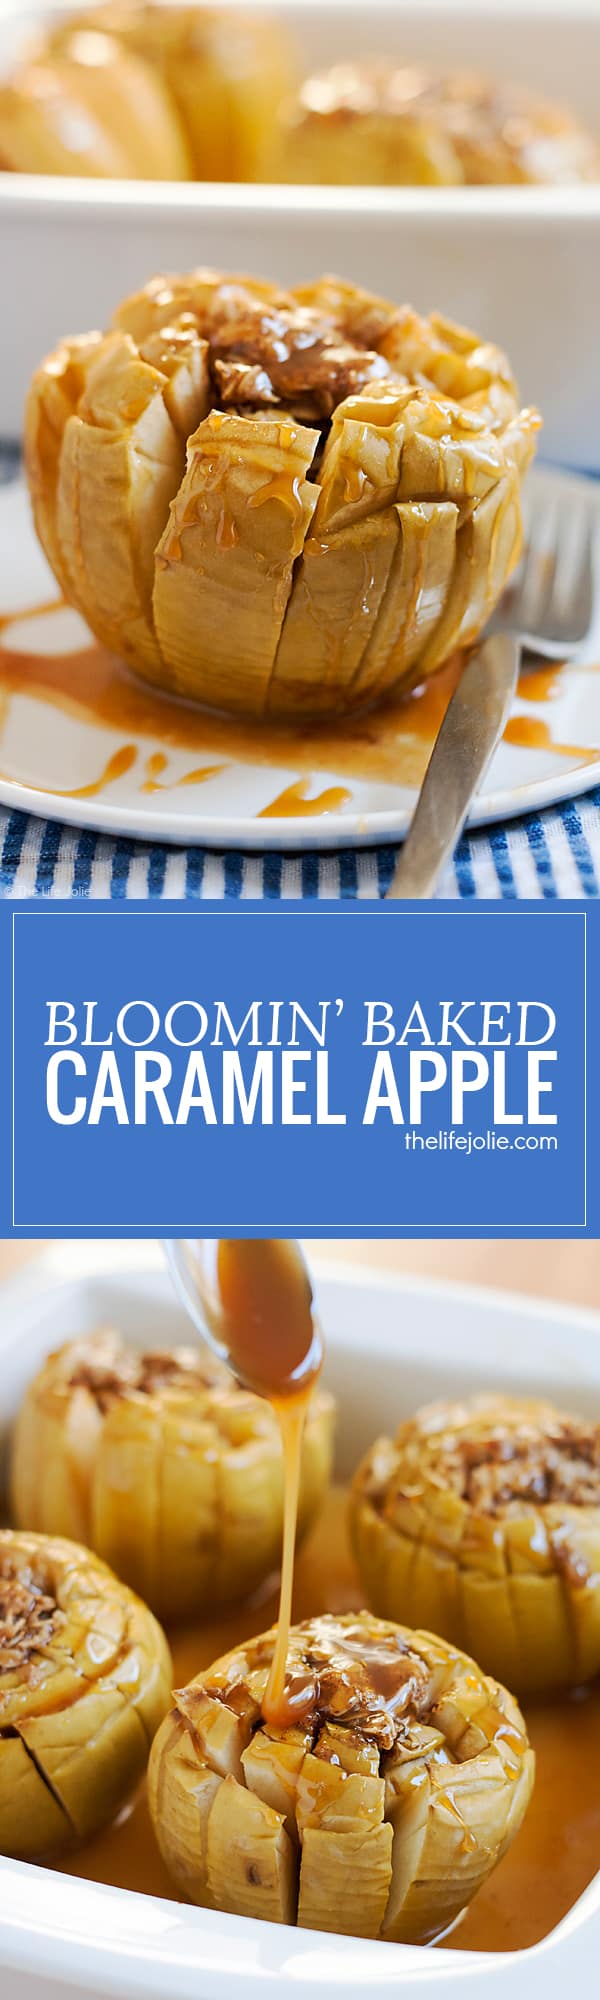 This Bloomin' Baked Caramel Apples recipe is the perfect fall dessert! They're quick and easy to make and deliciously sweet!